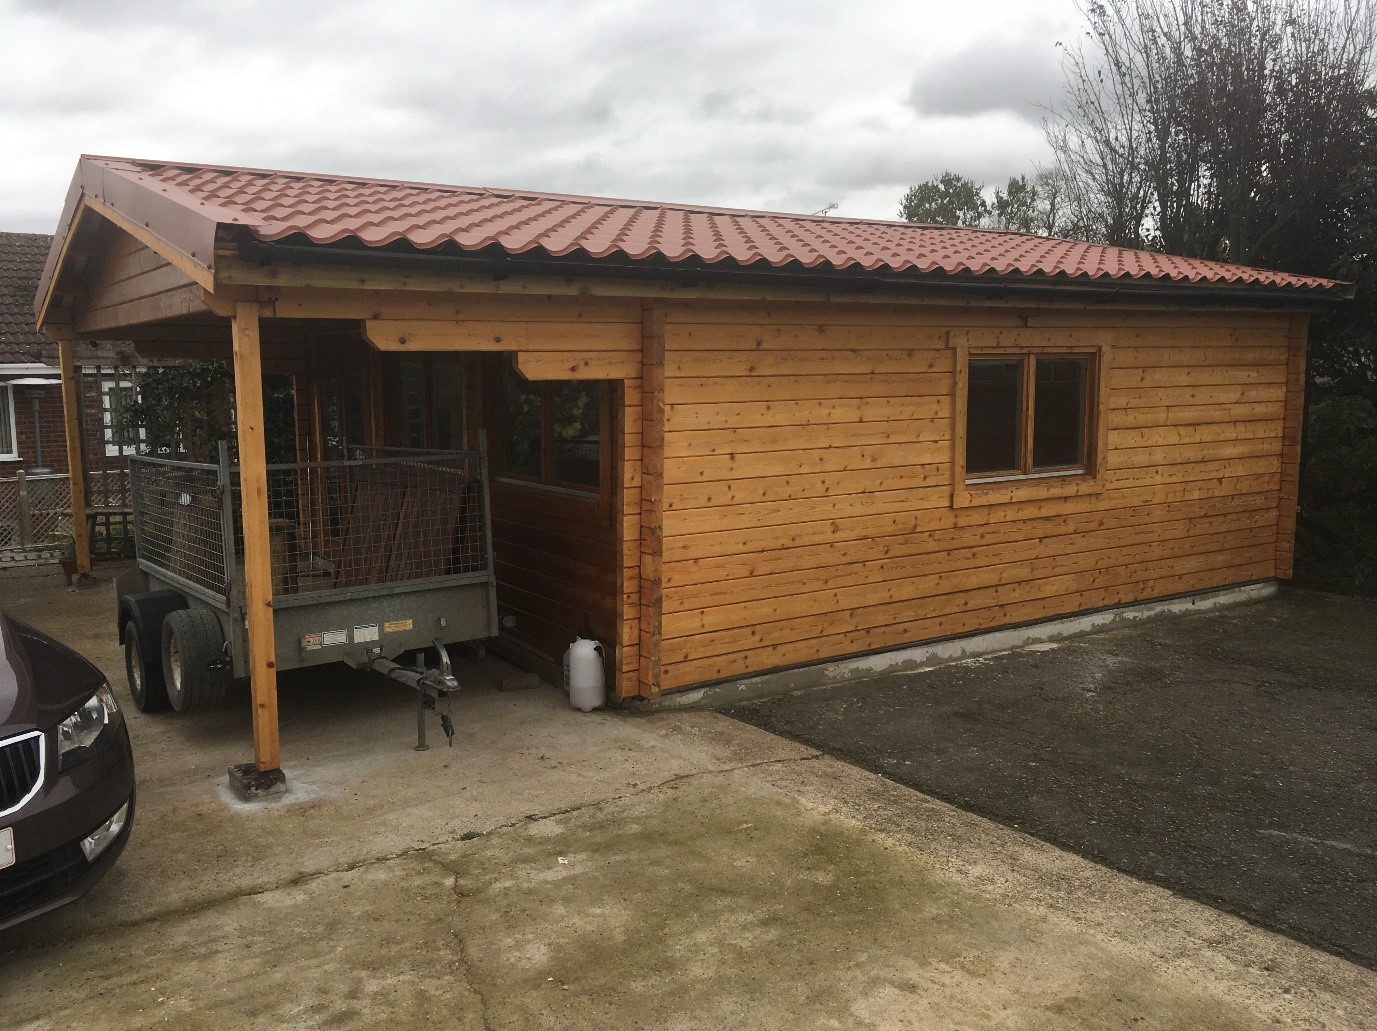 Cladco Profiles Tileform Roofing sheets in Copper match perfectly with the rustic timbre of this customer’s workshop